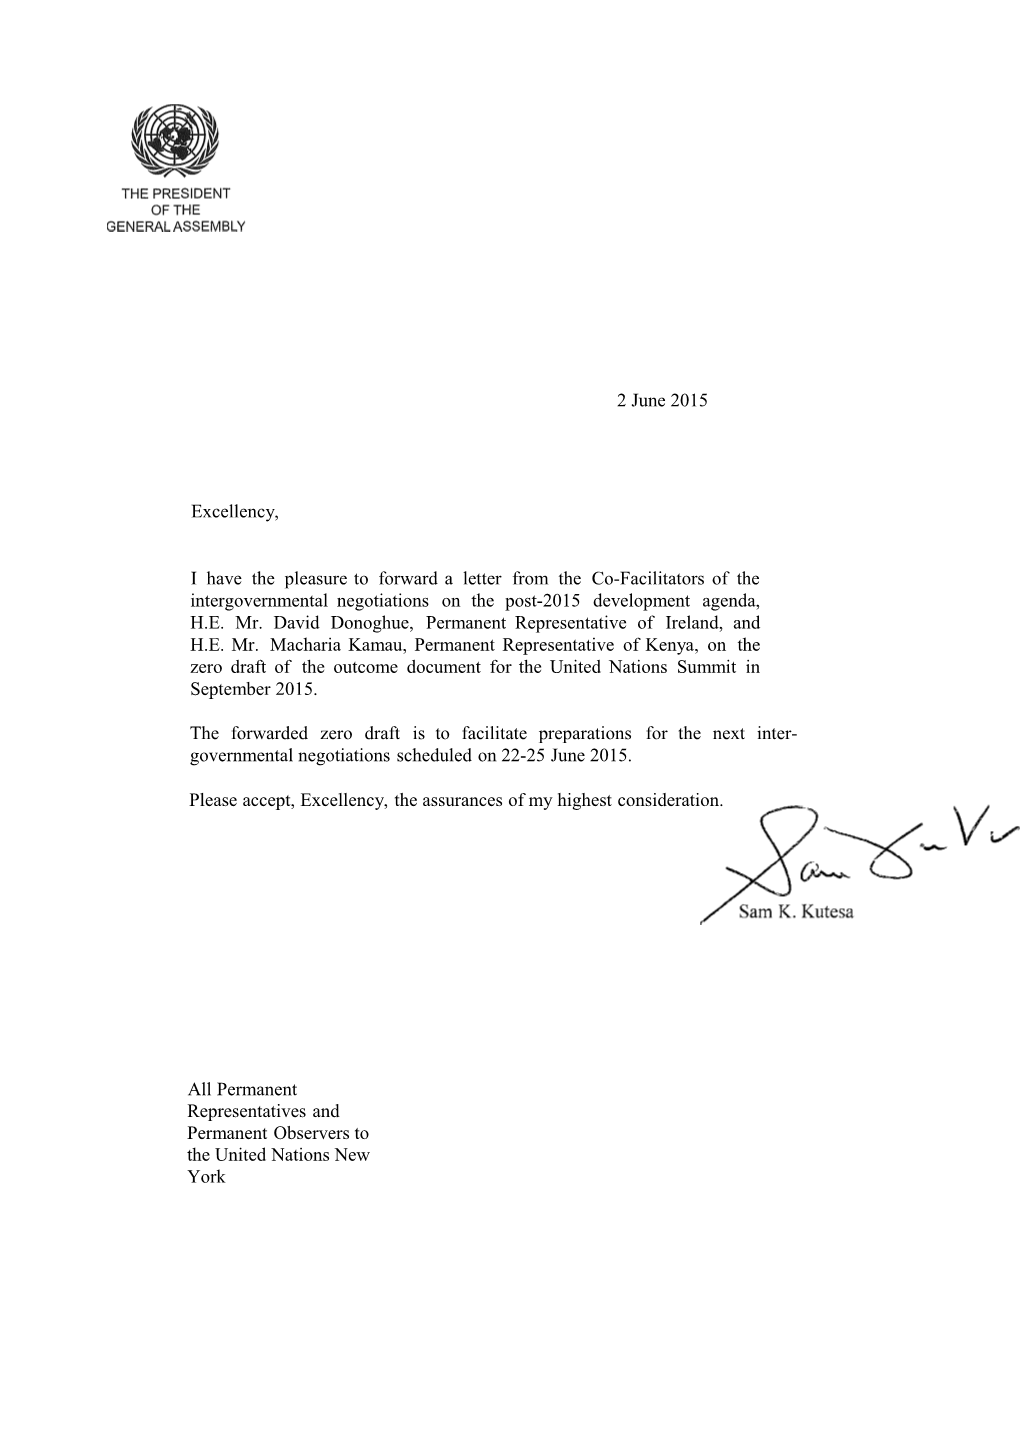 I Have the Pleasure to Forward a Letter from the Co-Facilitators of the Intergovernmental